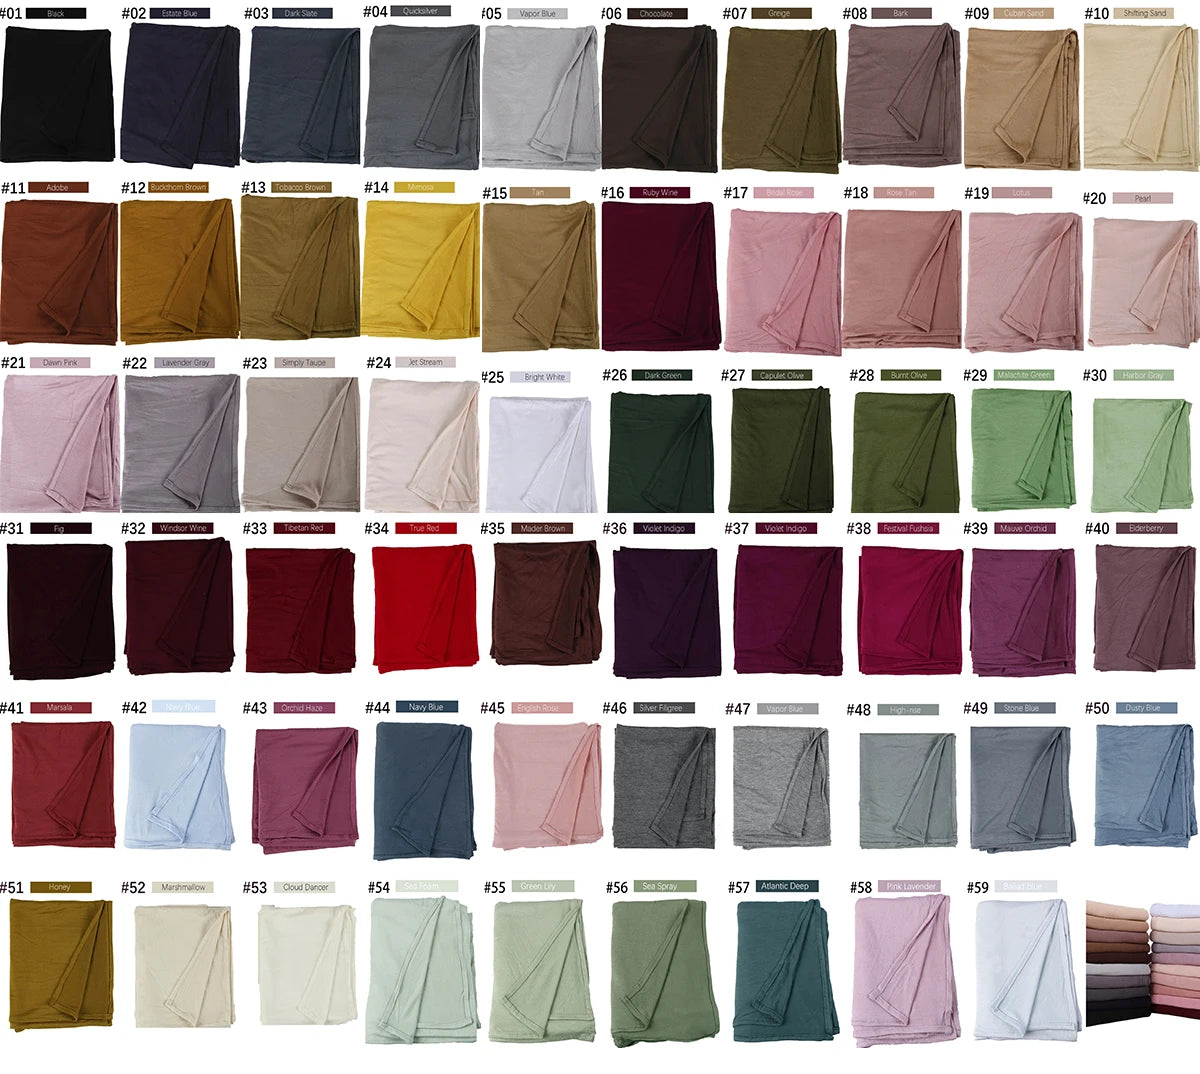 57 Coulors Stretchy Jersey Hijab